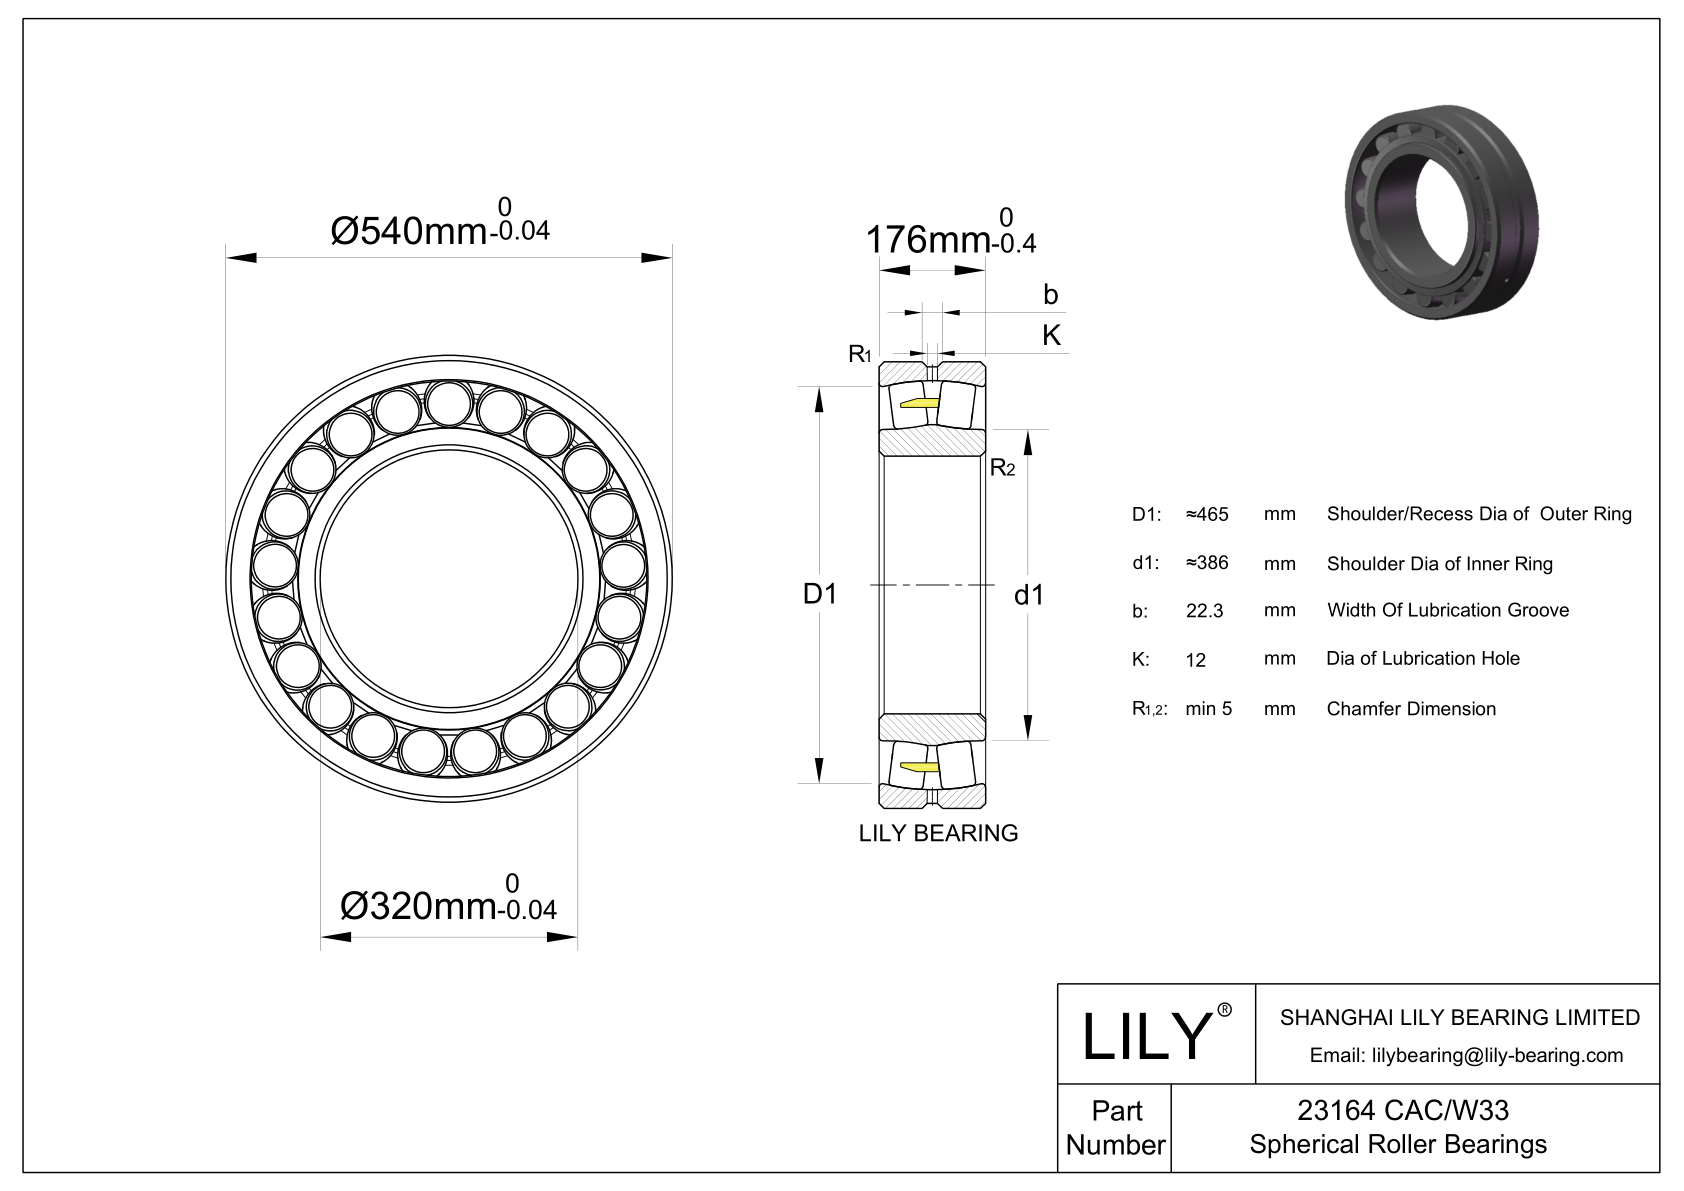 23164 CAC/W33 Double Row Spherical Roller Bearing cad drawing